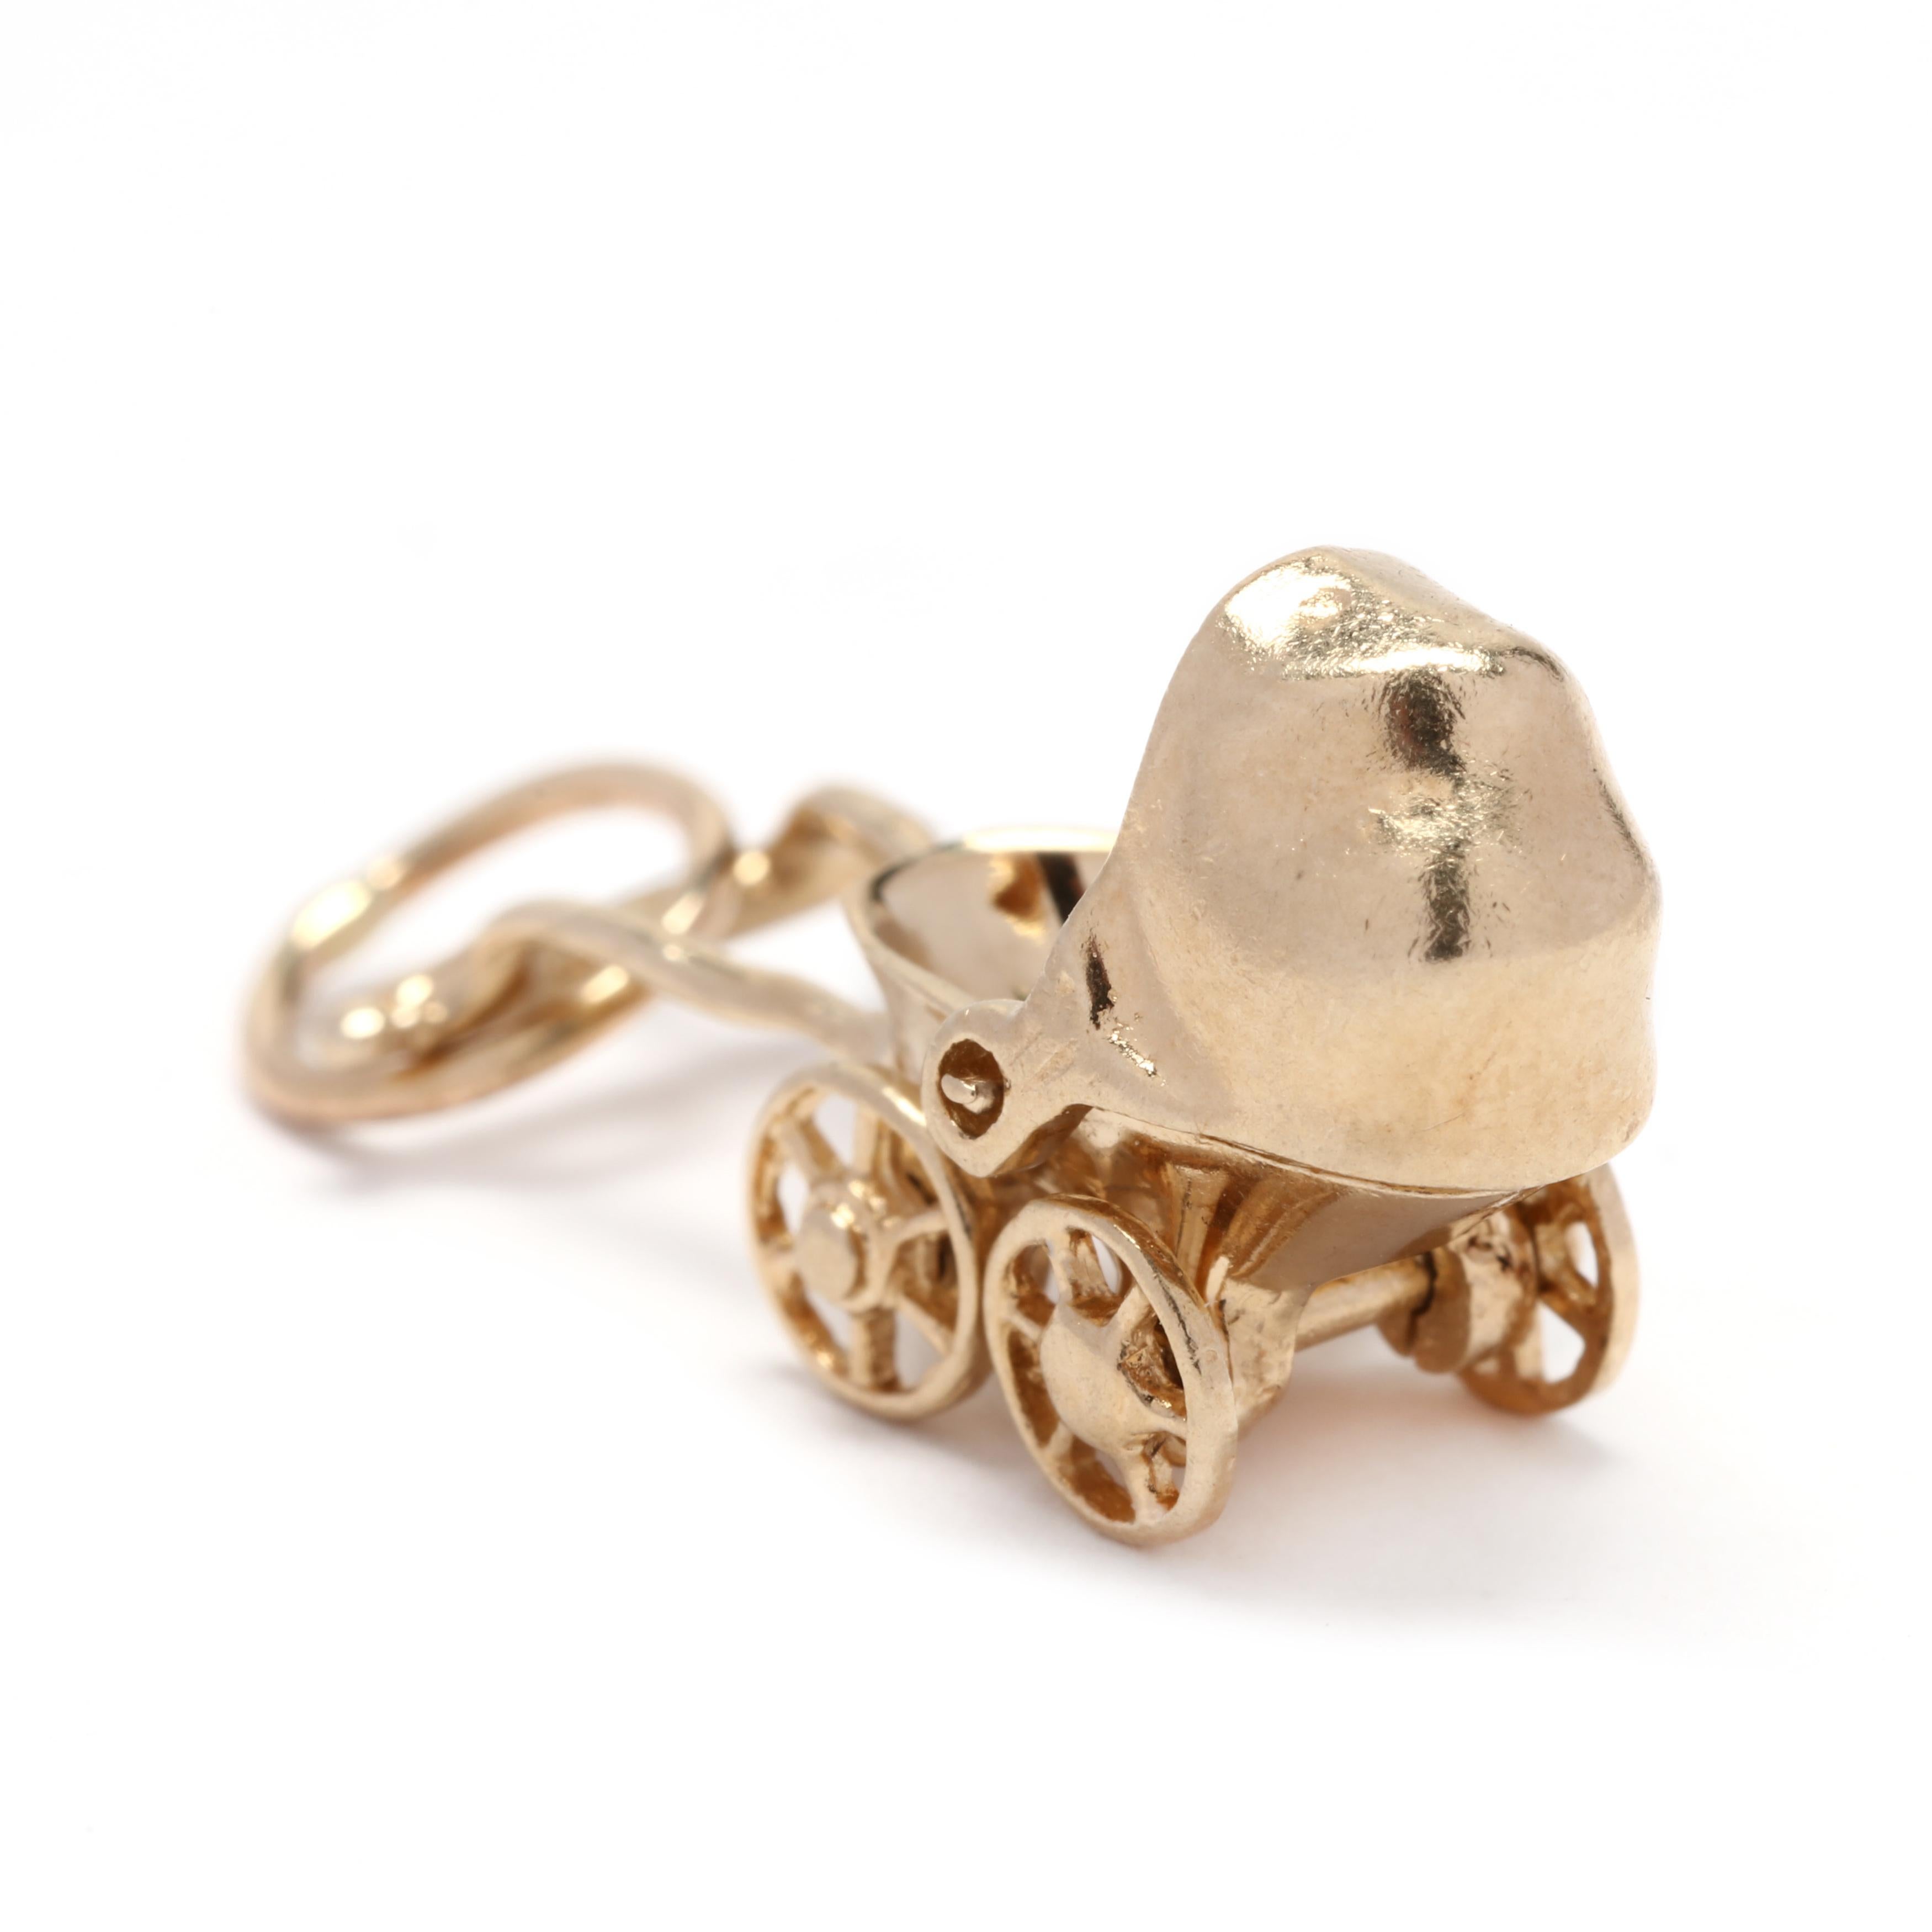 A vintage 14 karat yellow gold baby carriage charm. This charm features a vintage baby carriage motif with an articlated canopy and wheels.



Length: 15/16 in.



Width: 3/8 in.



Weight: 1.5 dwts.